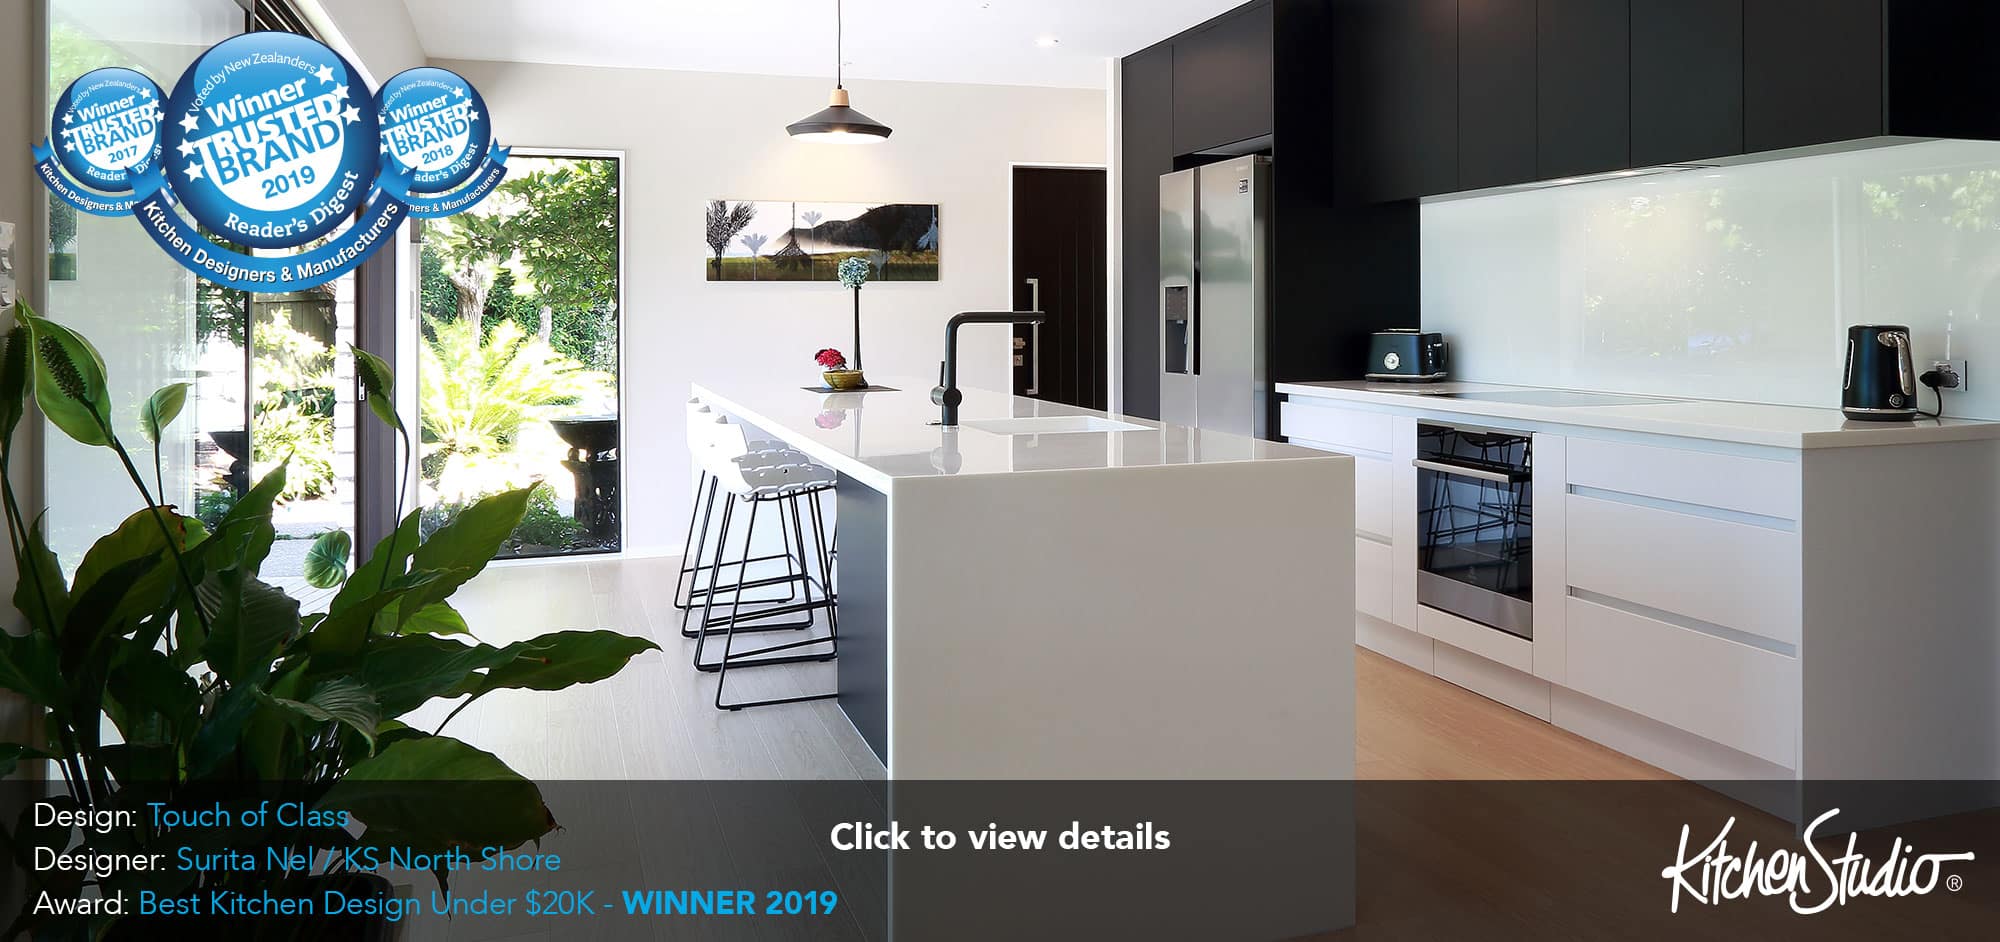 kitchen studio • the most trusted kitchen brand in new zealand